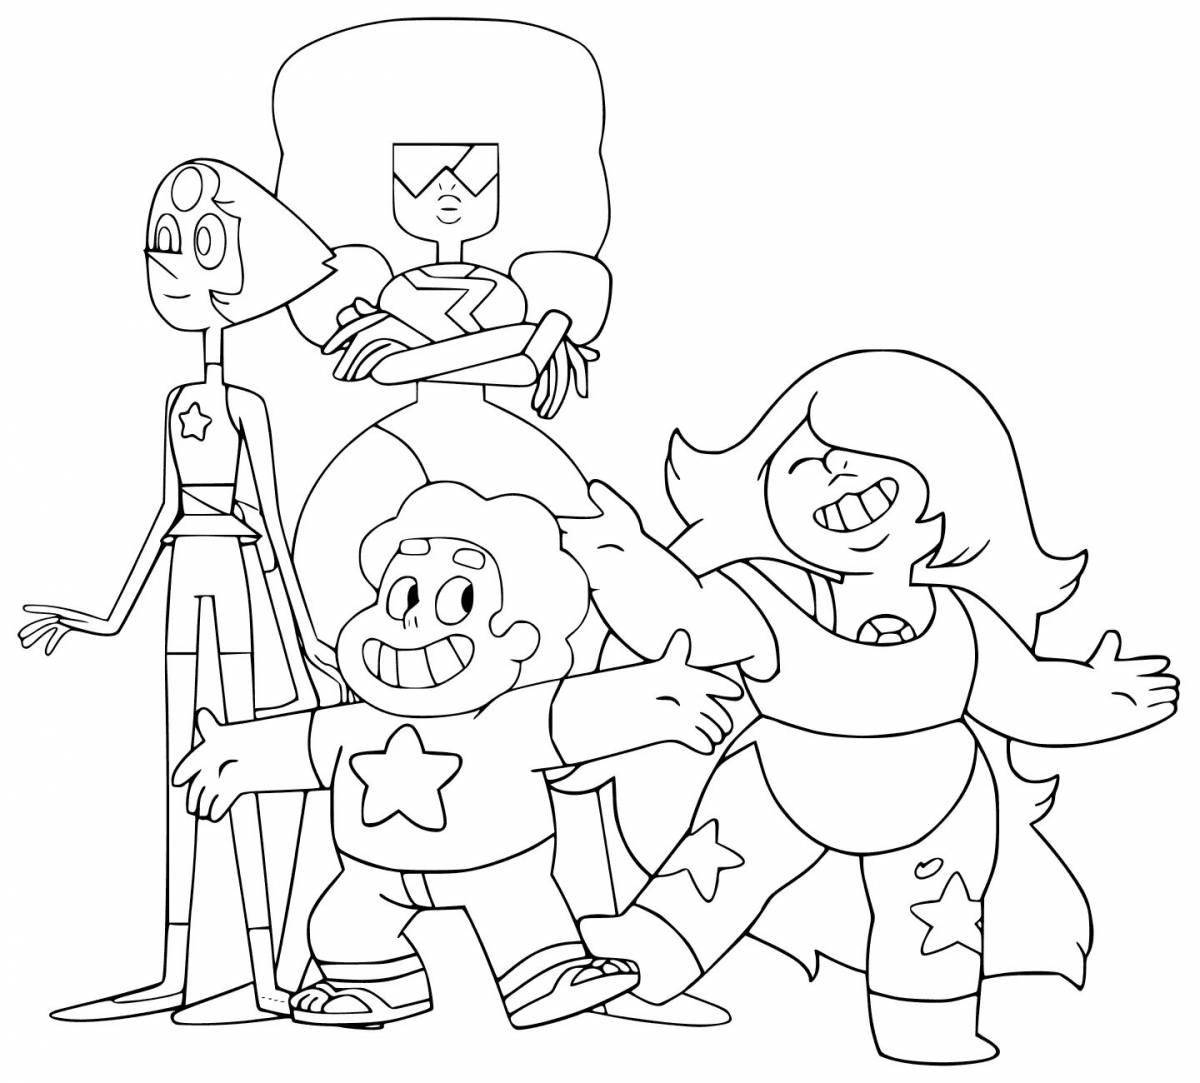 Steven universe holiday coloring book